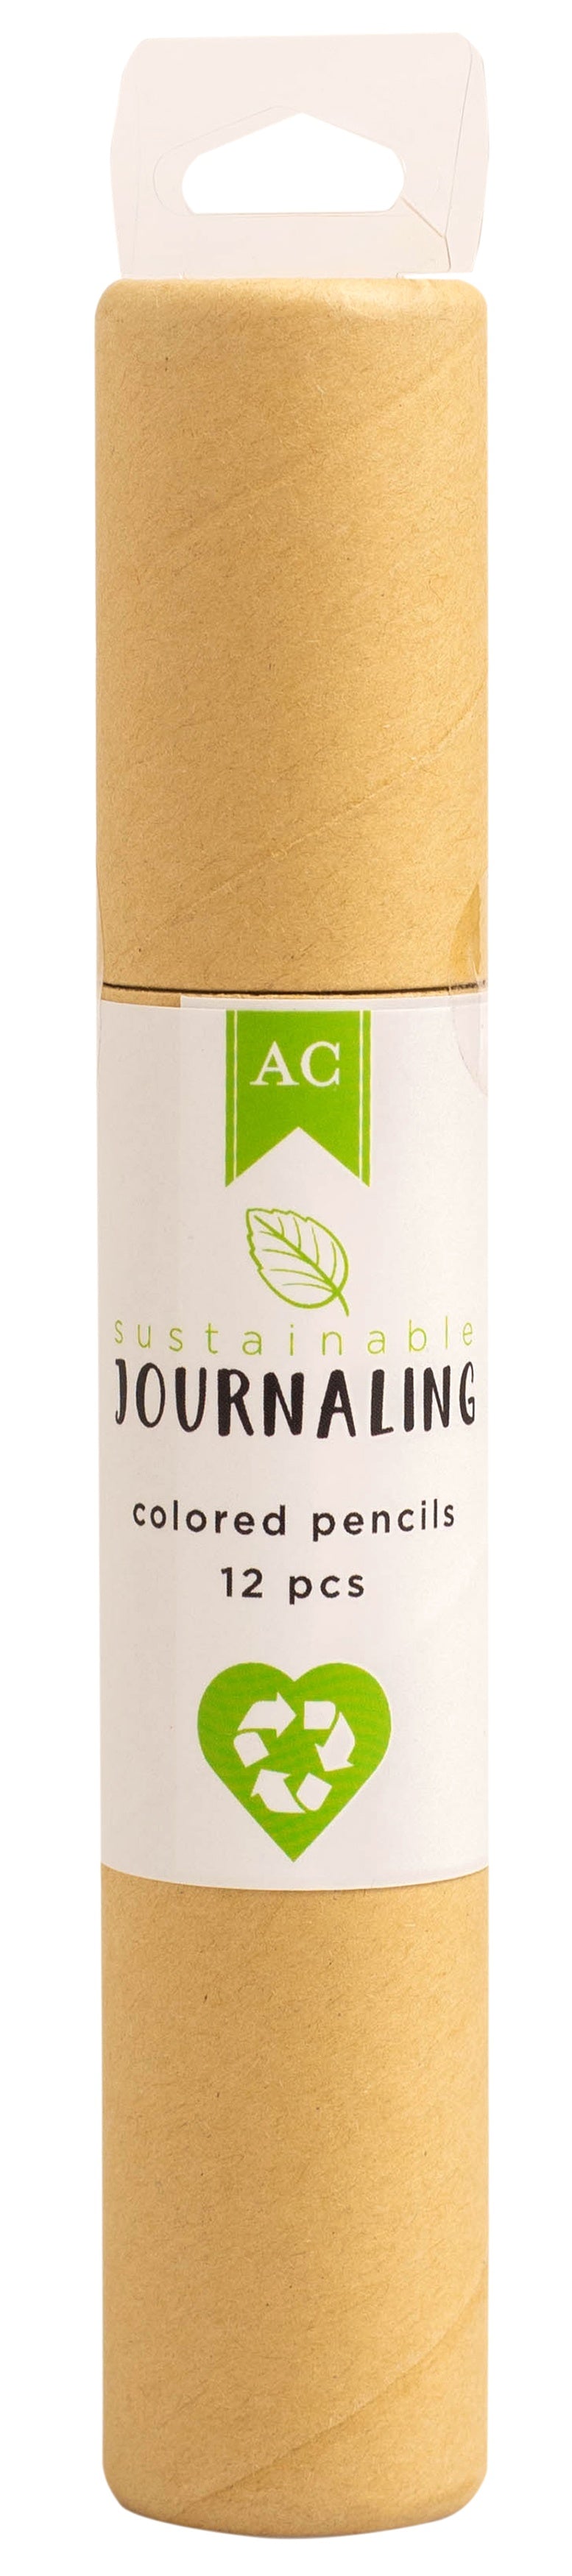 AC Sustainable Journaling Recycled Paper Colored Pencils-12/Pkg